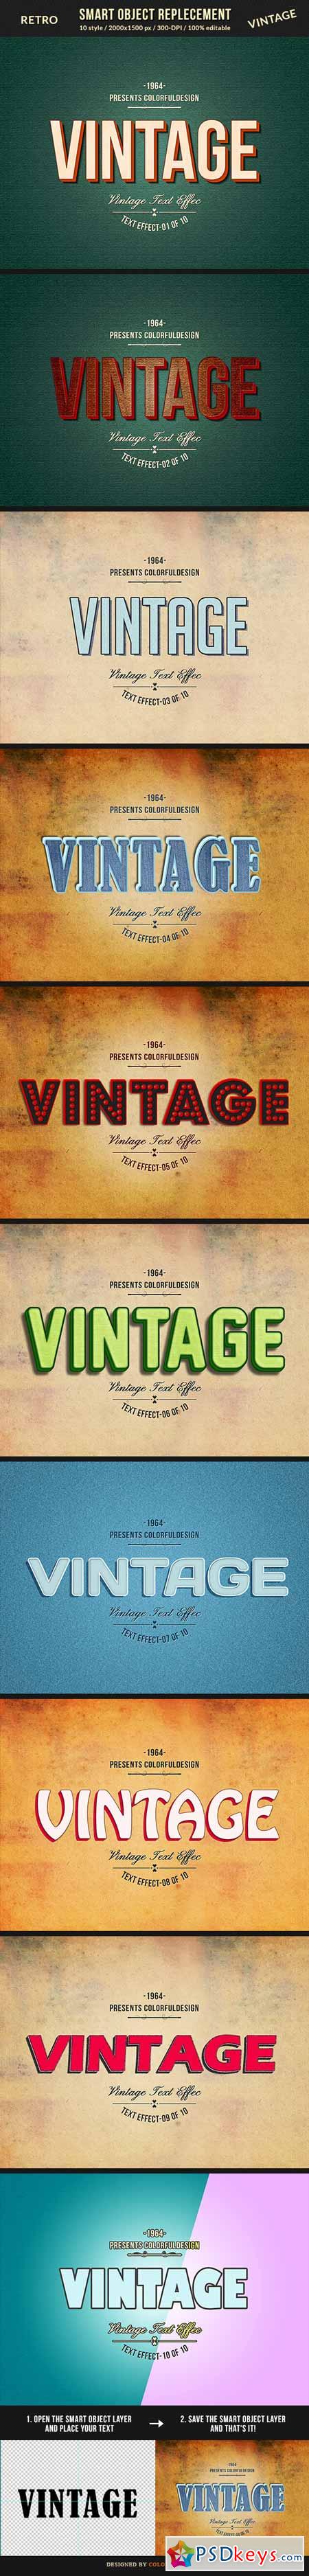 Retro Vintage Text Effects 10187529